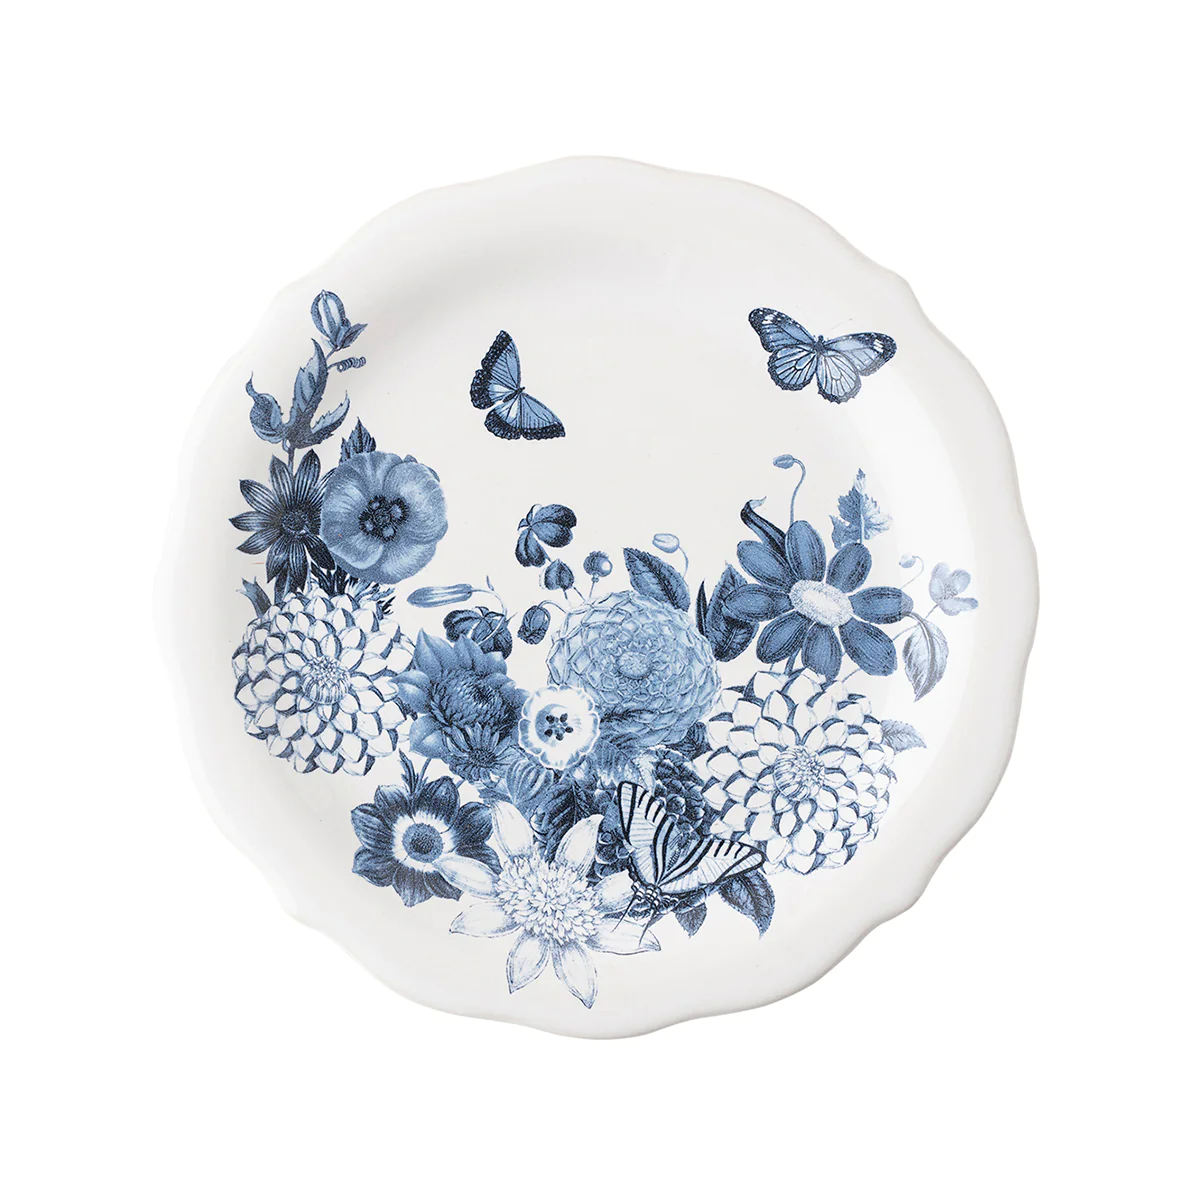 Field of Flowers Dessert/ Salad Plate in Chambray Blue